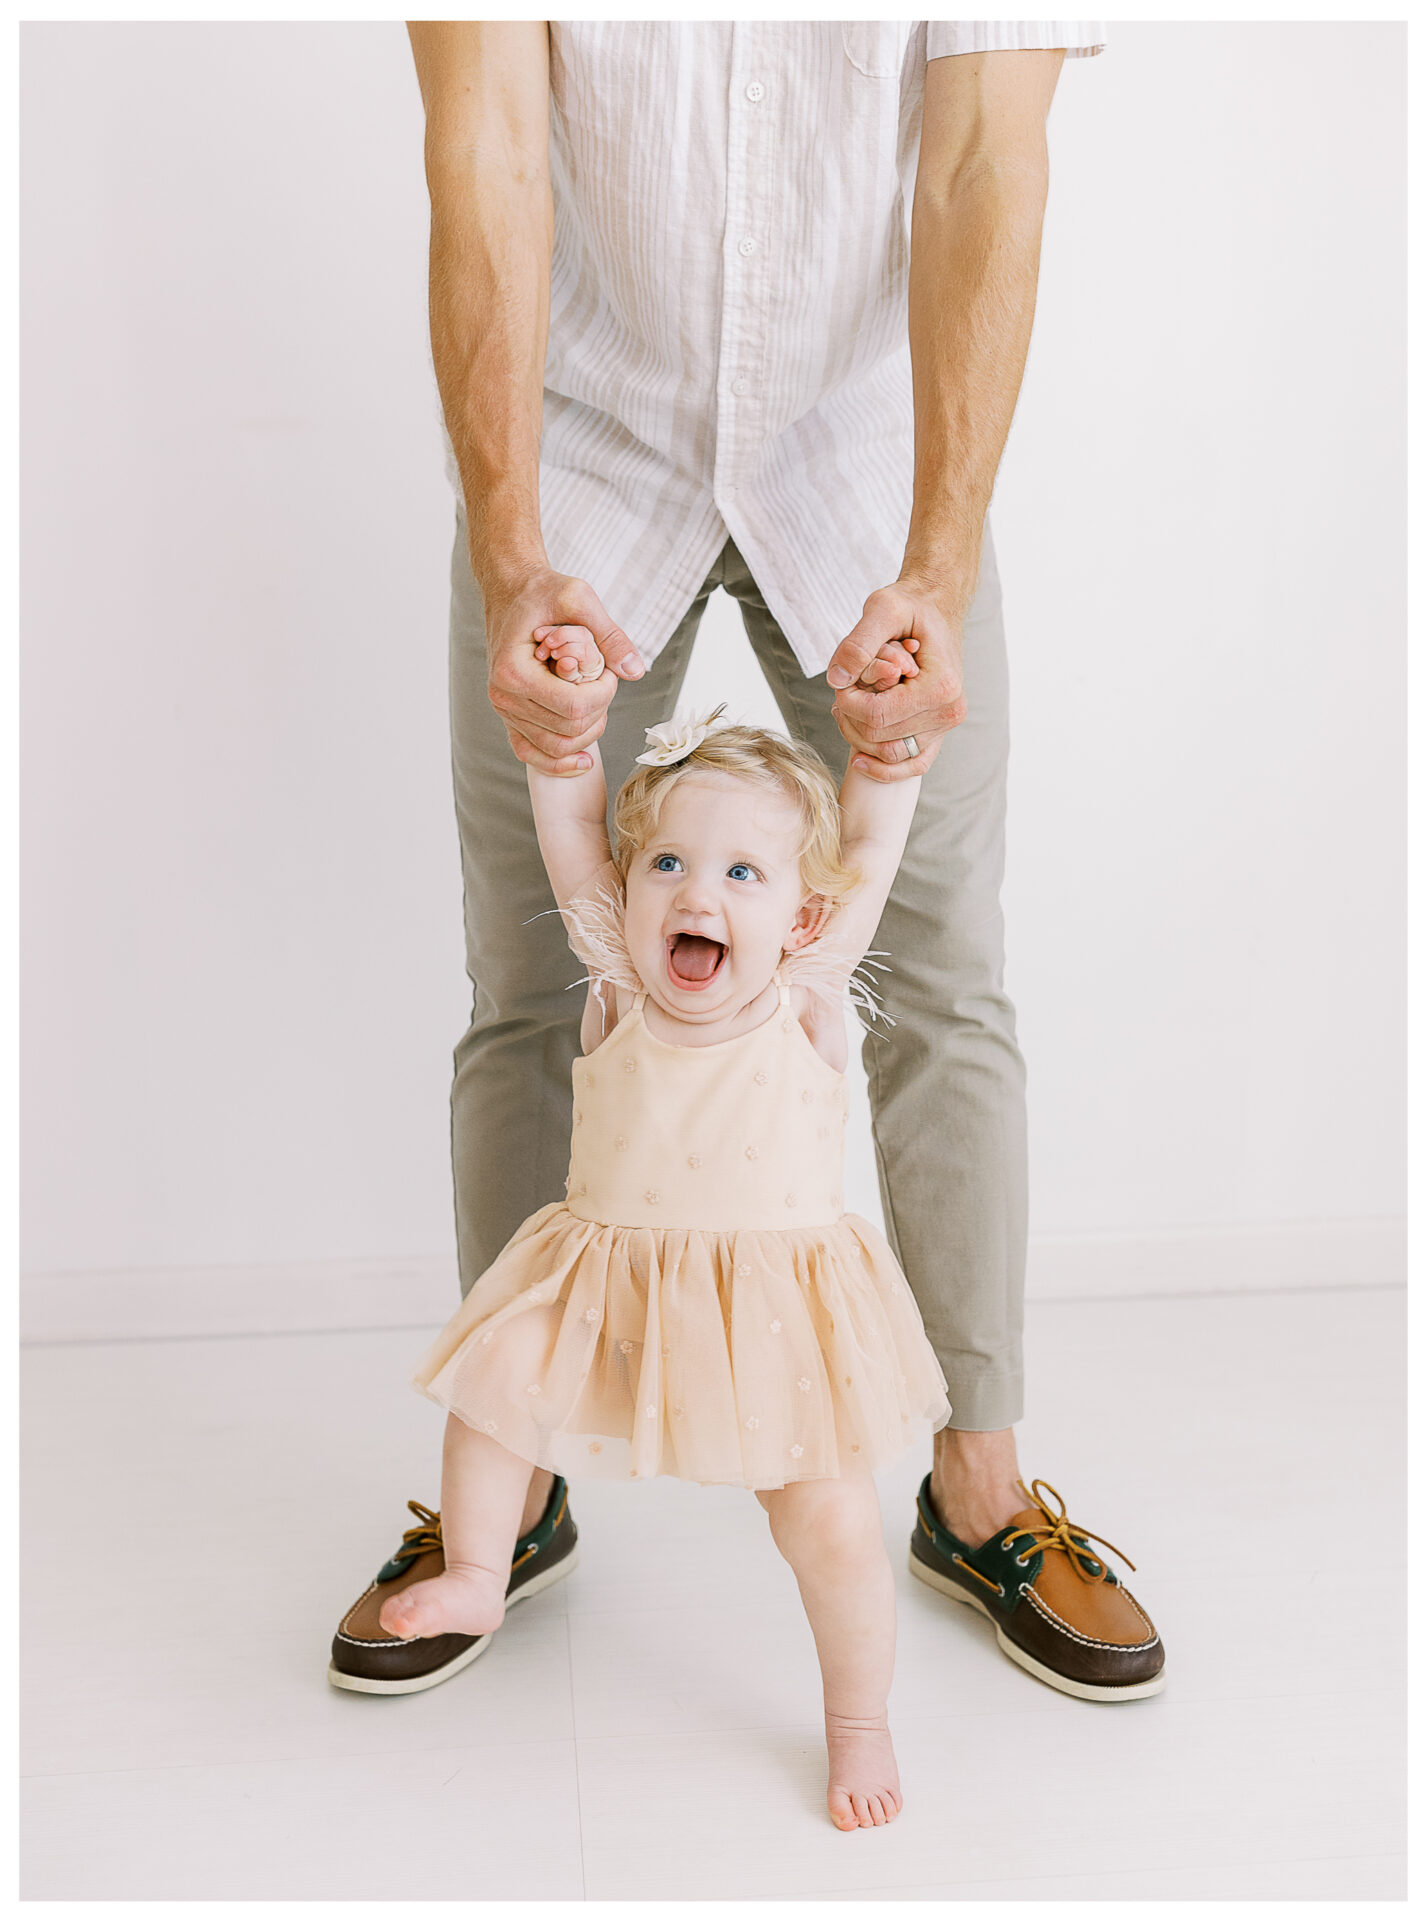 Winter Freire Photography | First birthday photos for baby girl in a photography studio with her father